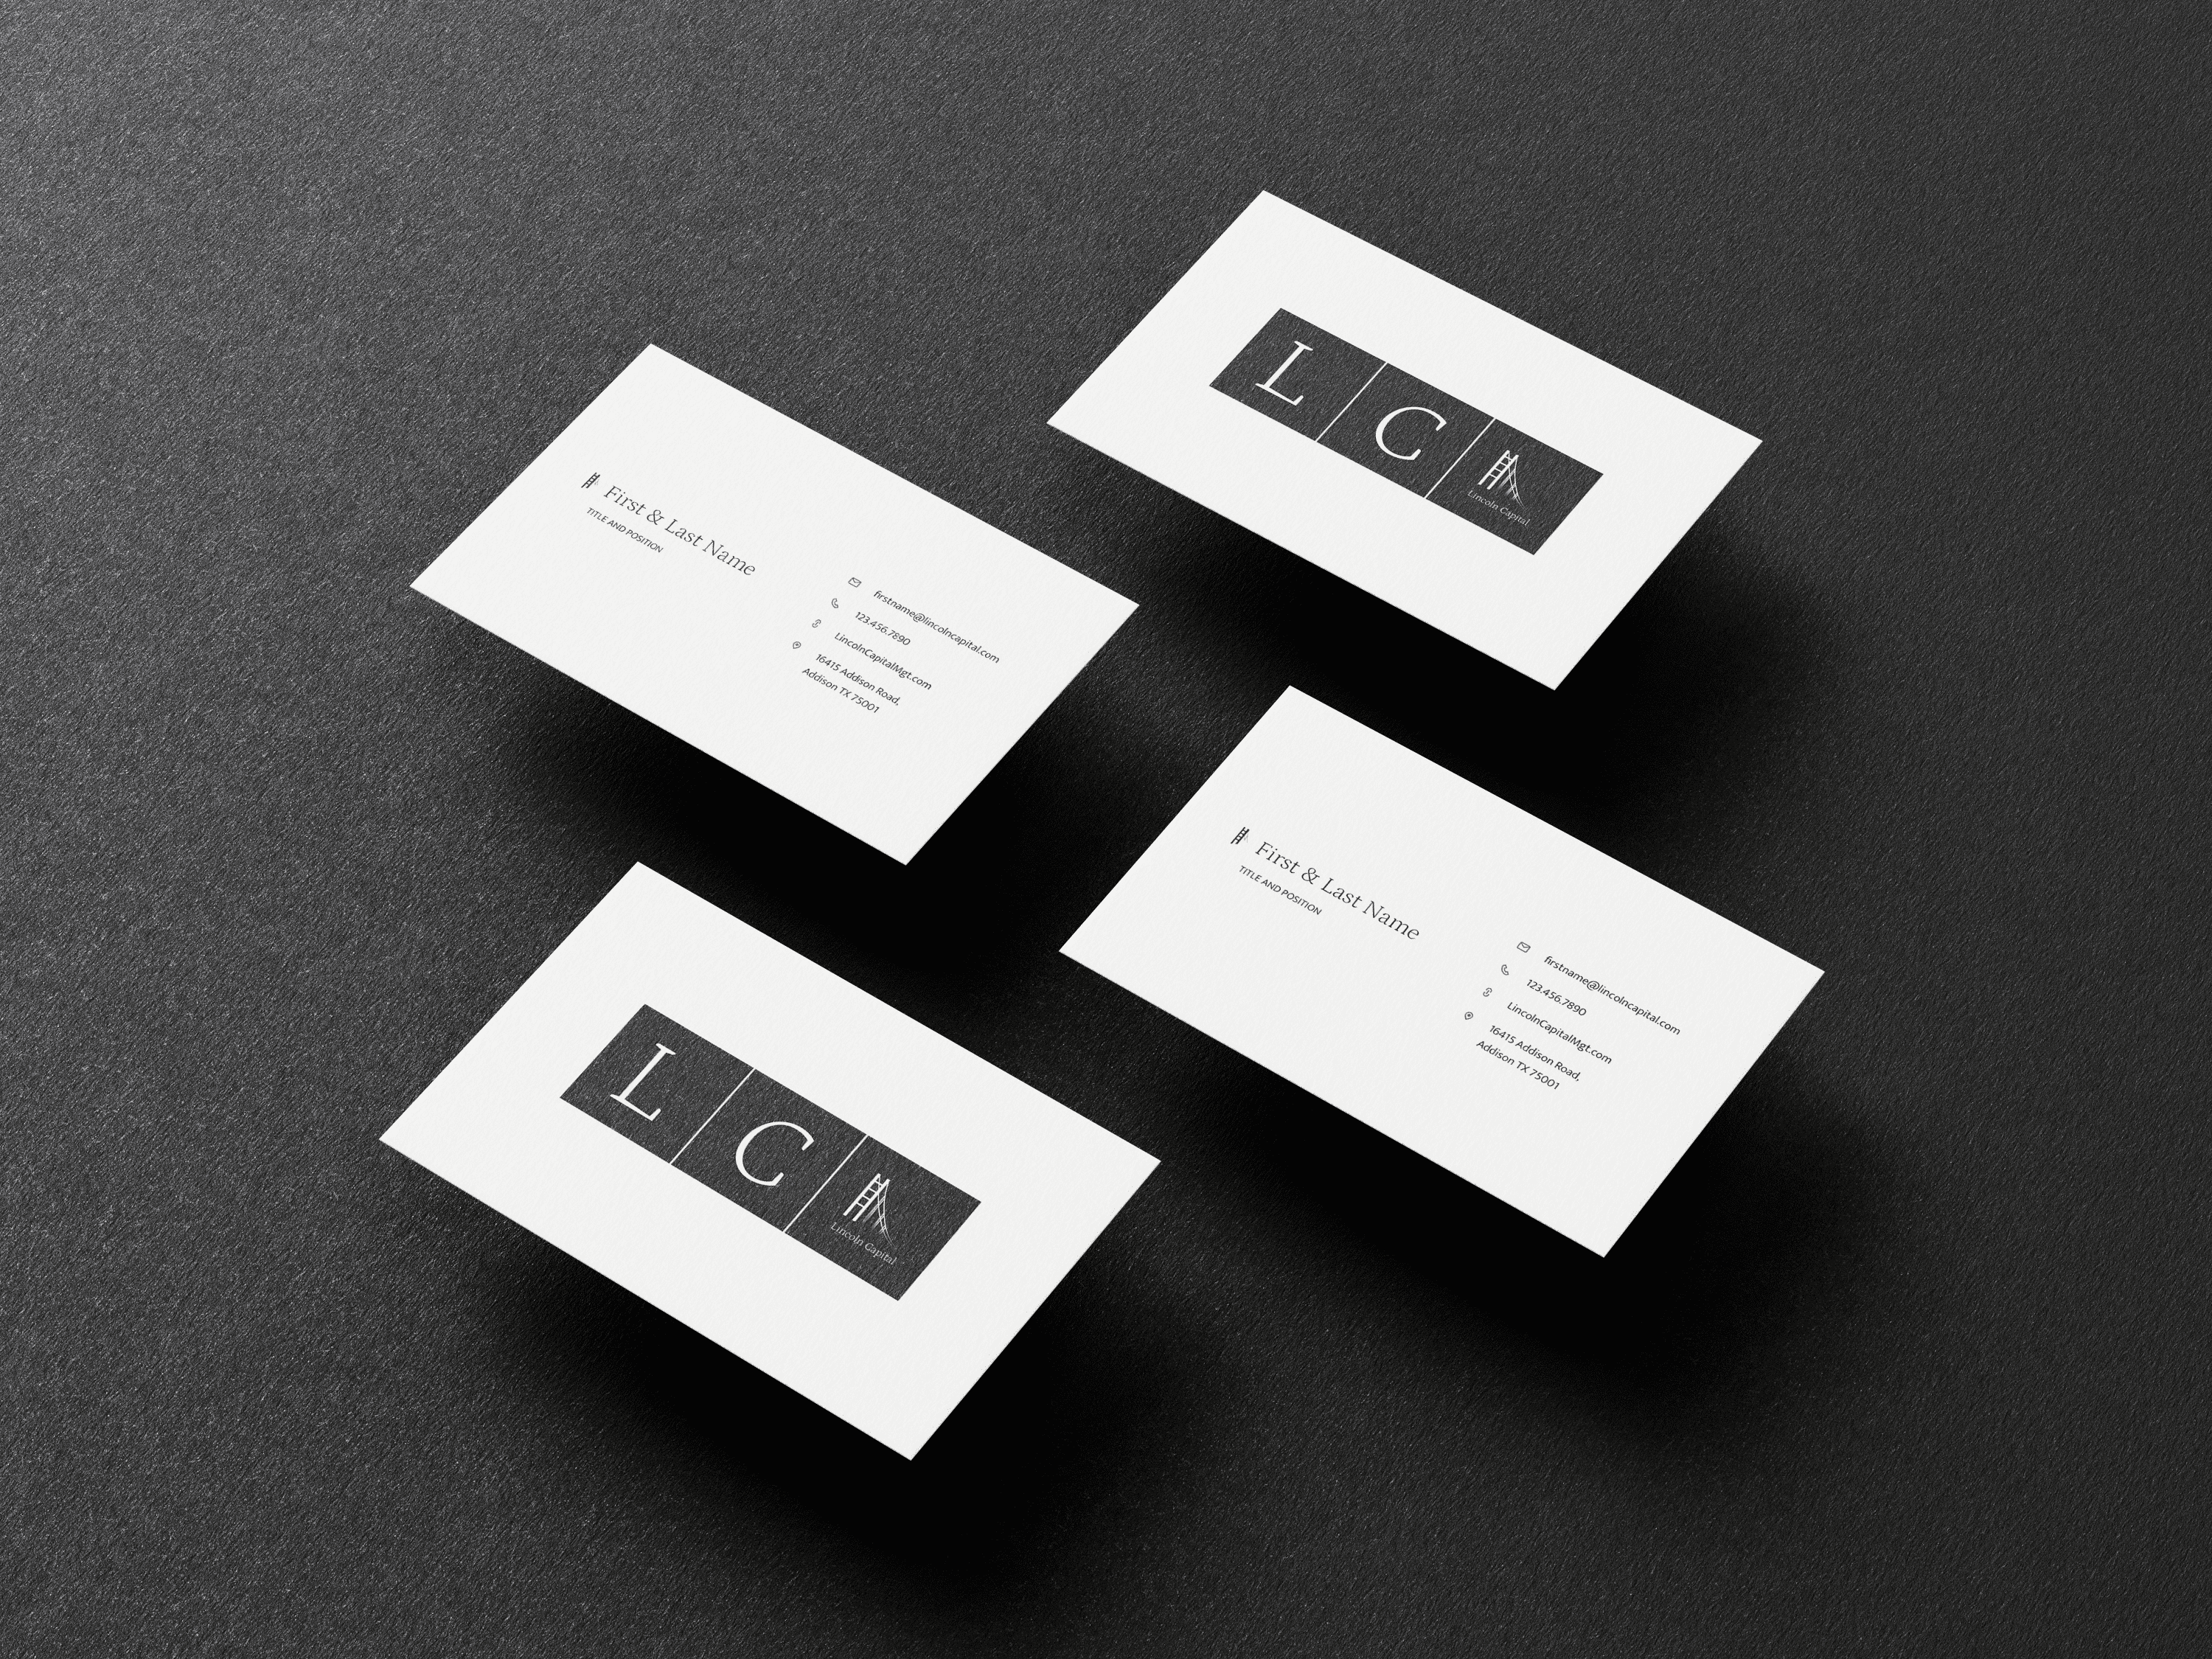 4 identical business cards arranged in a diamond